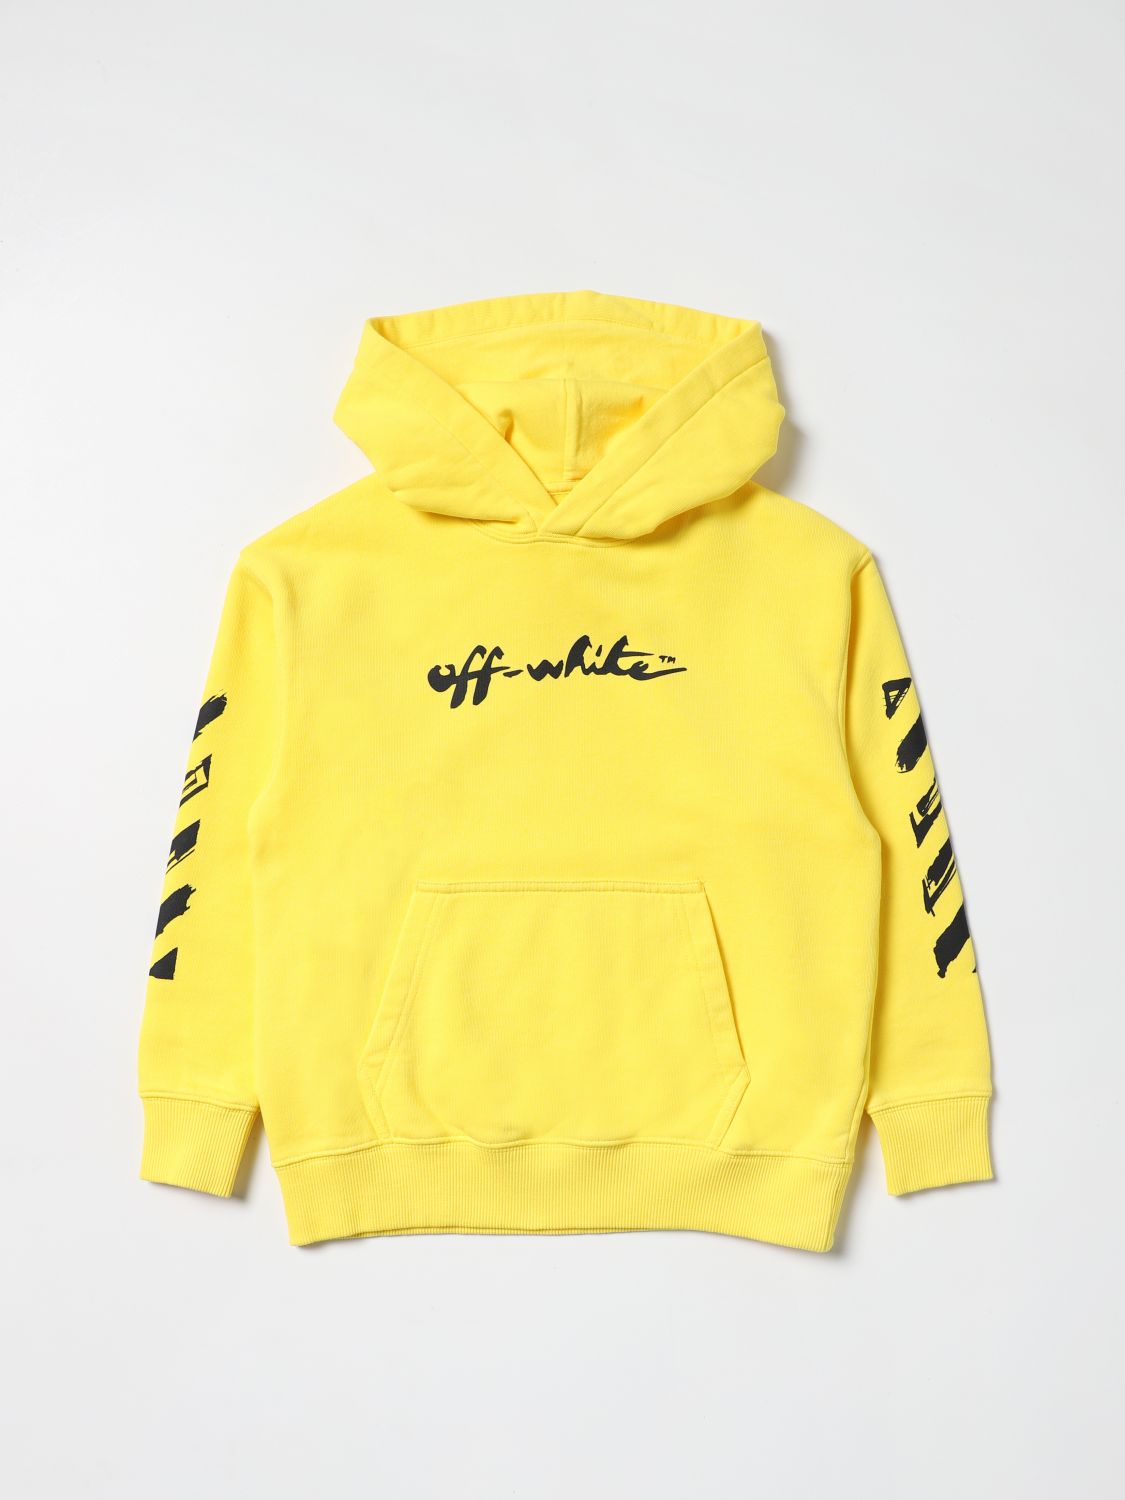 OFF-WHITE™ KIDS Sweater Boy 9-16 years online on YOOX United